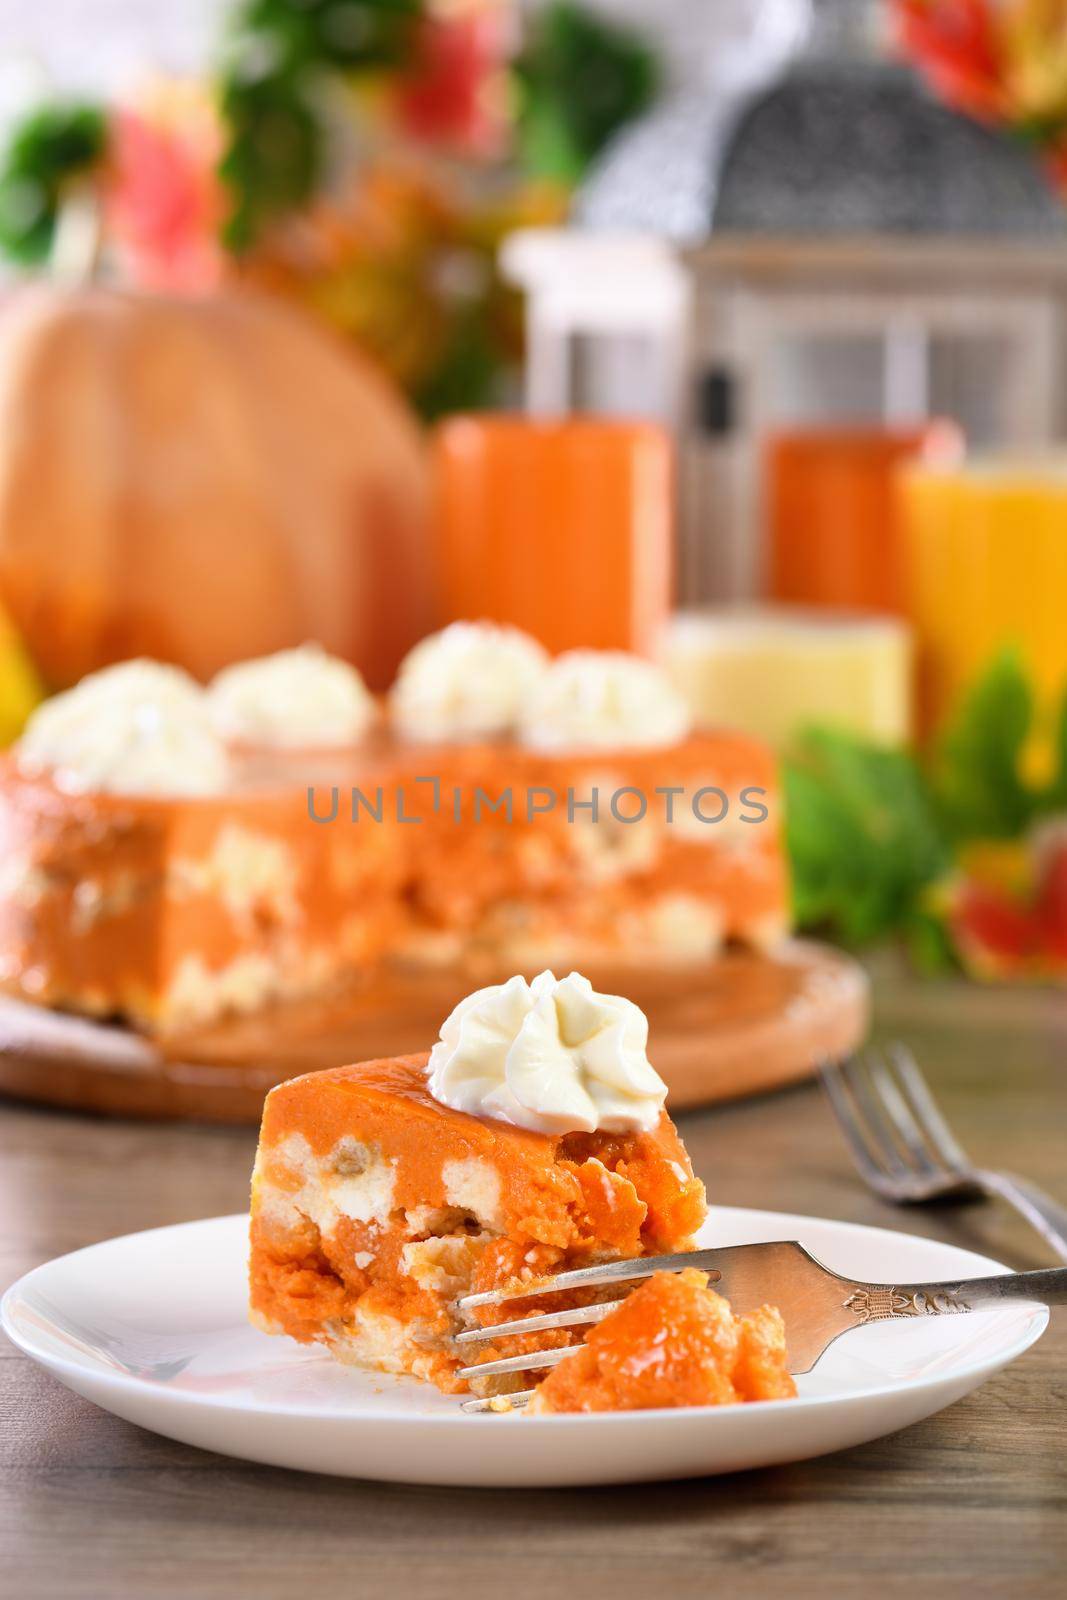 Pumpkin and cottage cheese casserole by Apolonia